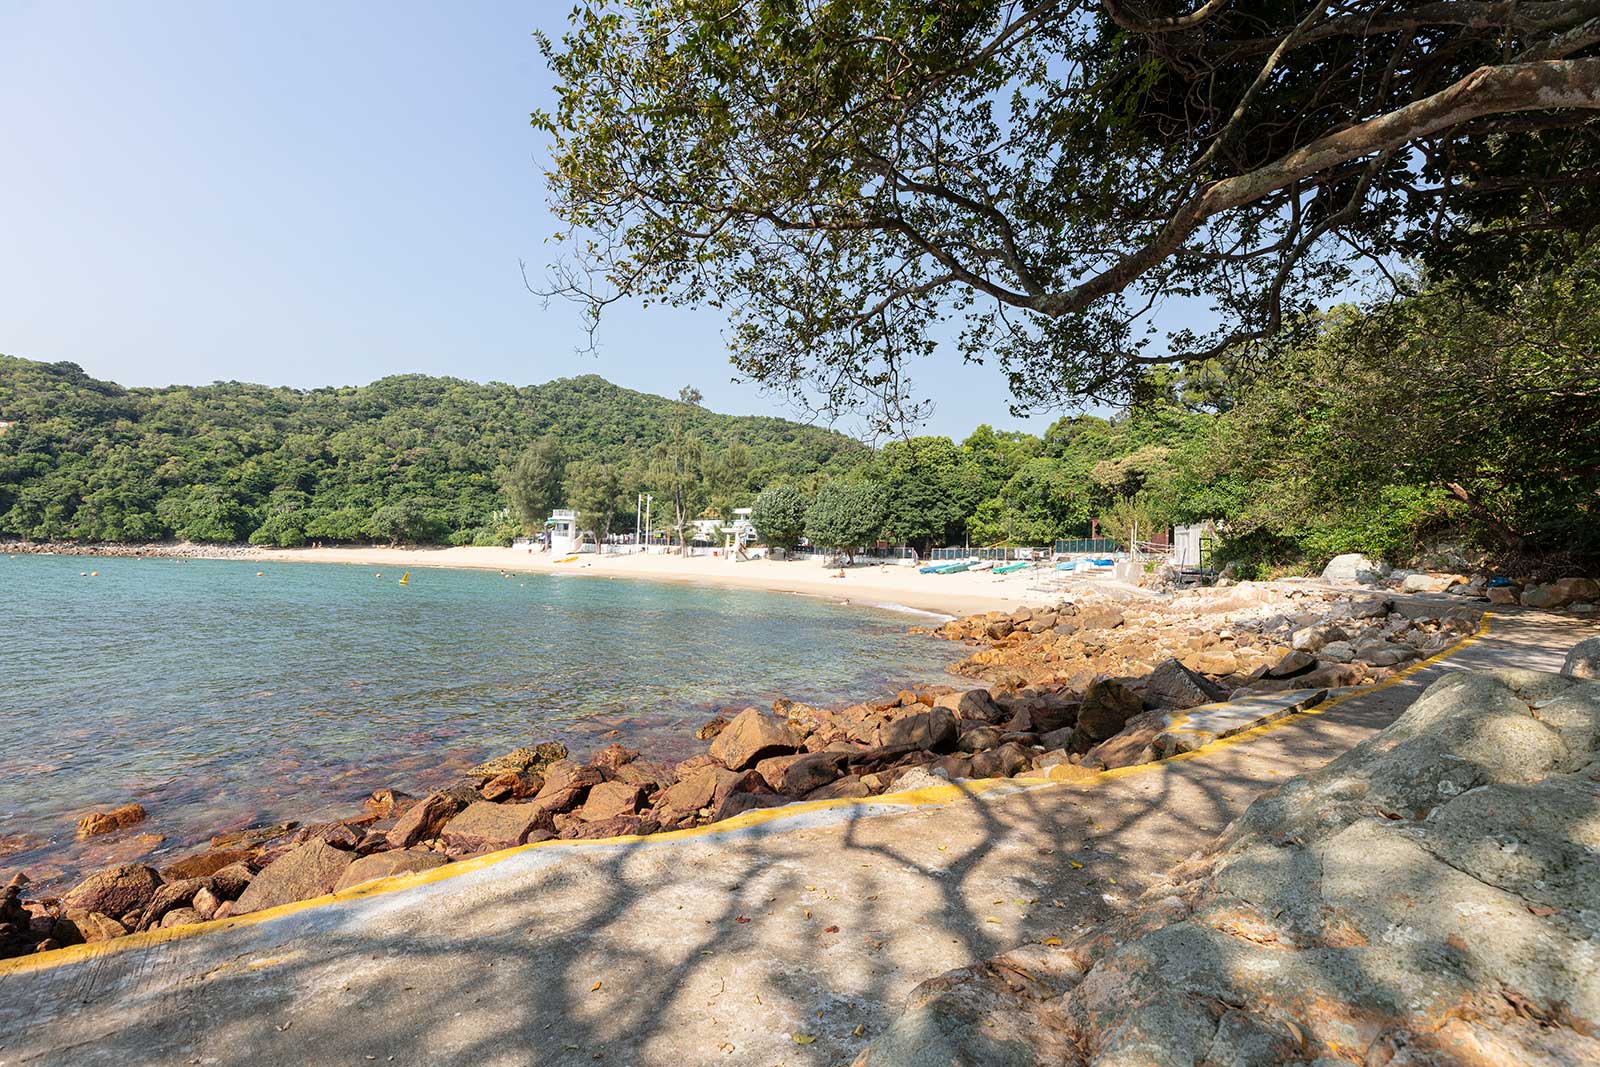 The shoreline of Sham Wan, close to Sok Kwu Wan. Visiting the beach is one of the most popular things to do in Lamma Island